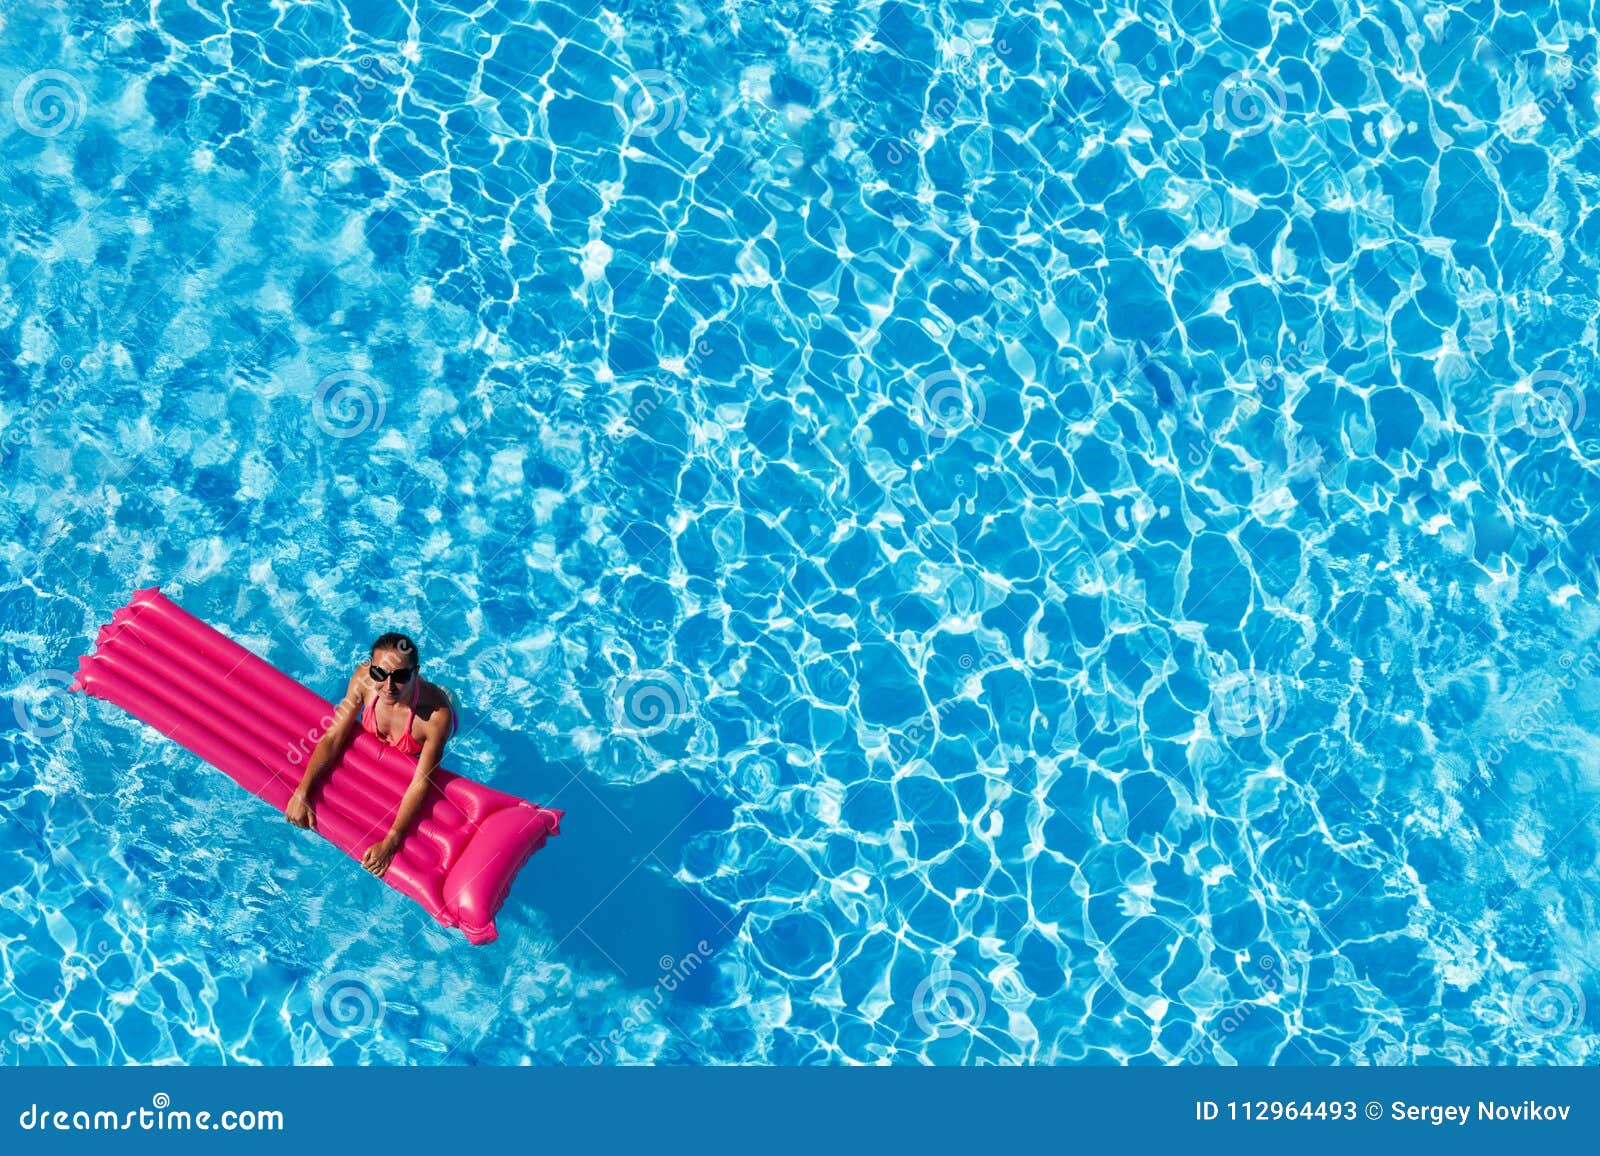 Woman Swimming with Inflatable Mattress in Pool Stock Image - Image of ...